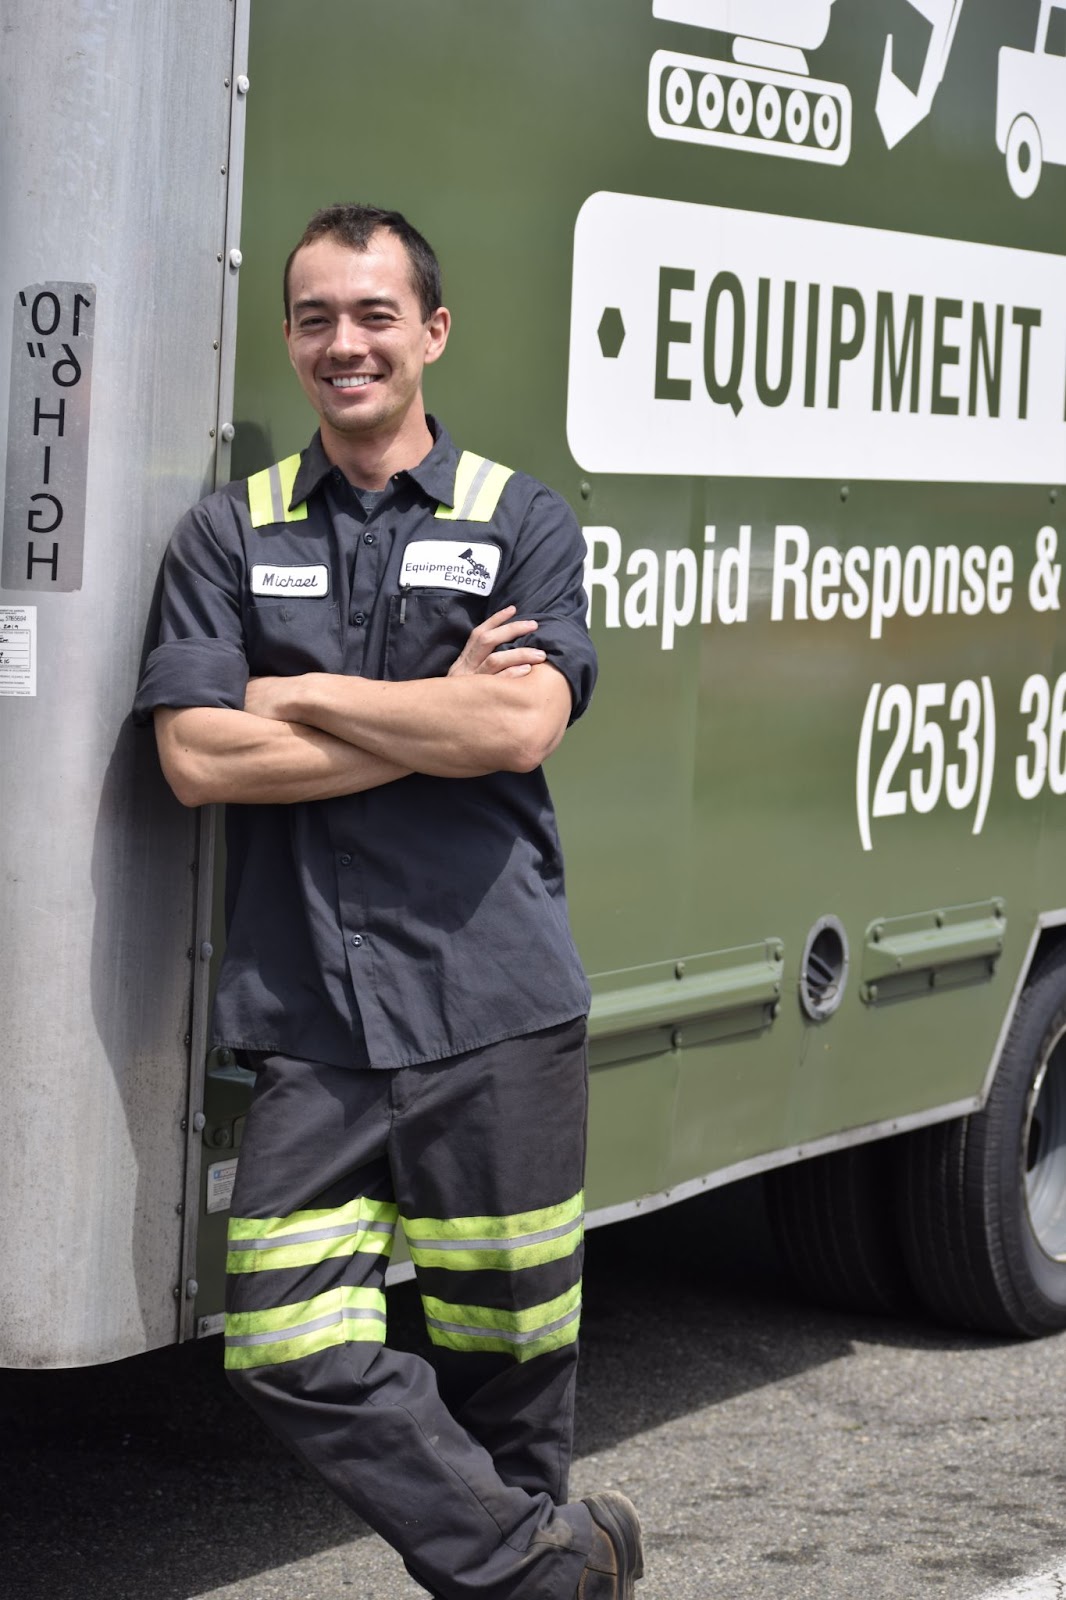 An Equipment Experts, Inc. employee leaning against an Equipment Experts, Inc. truck